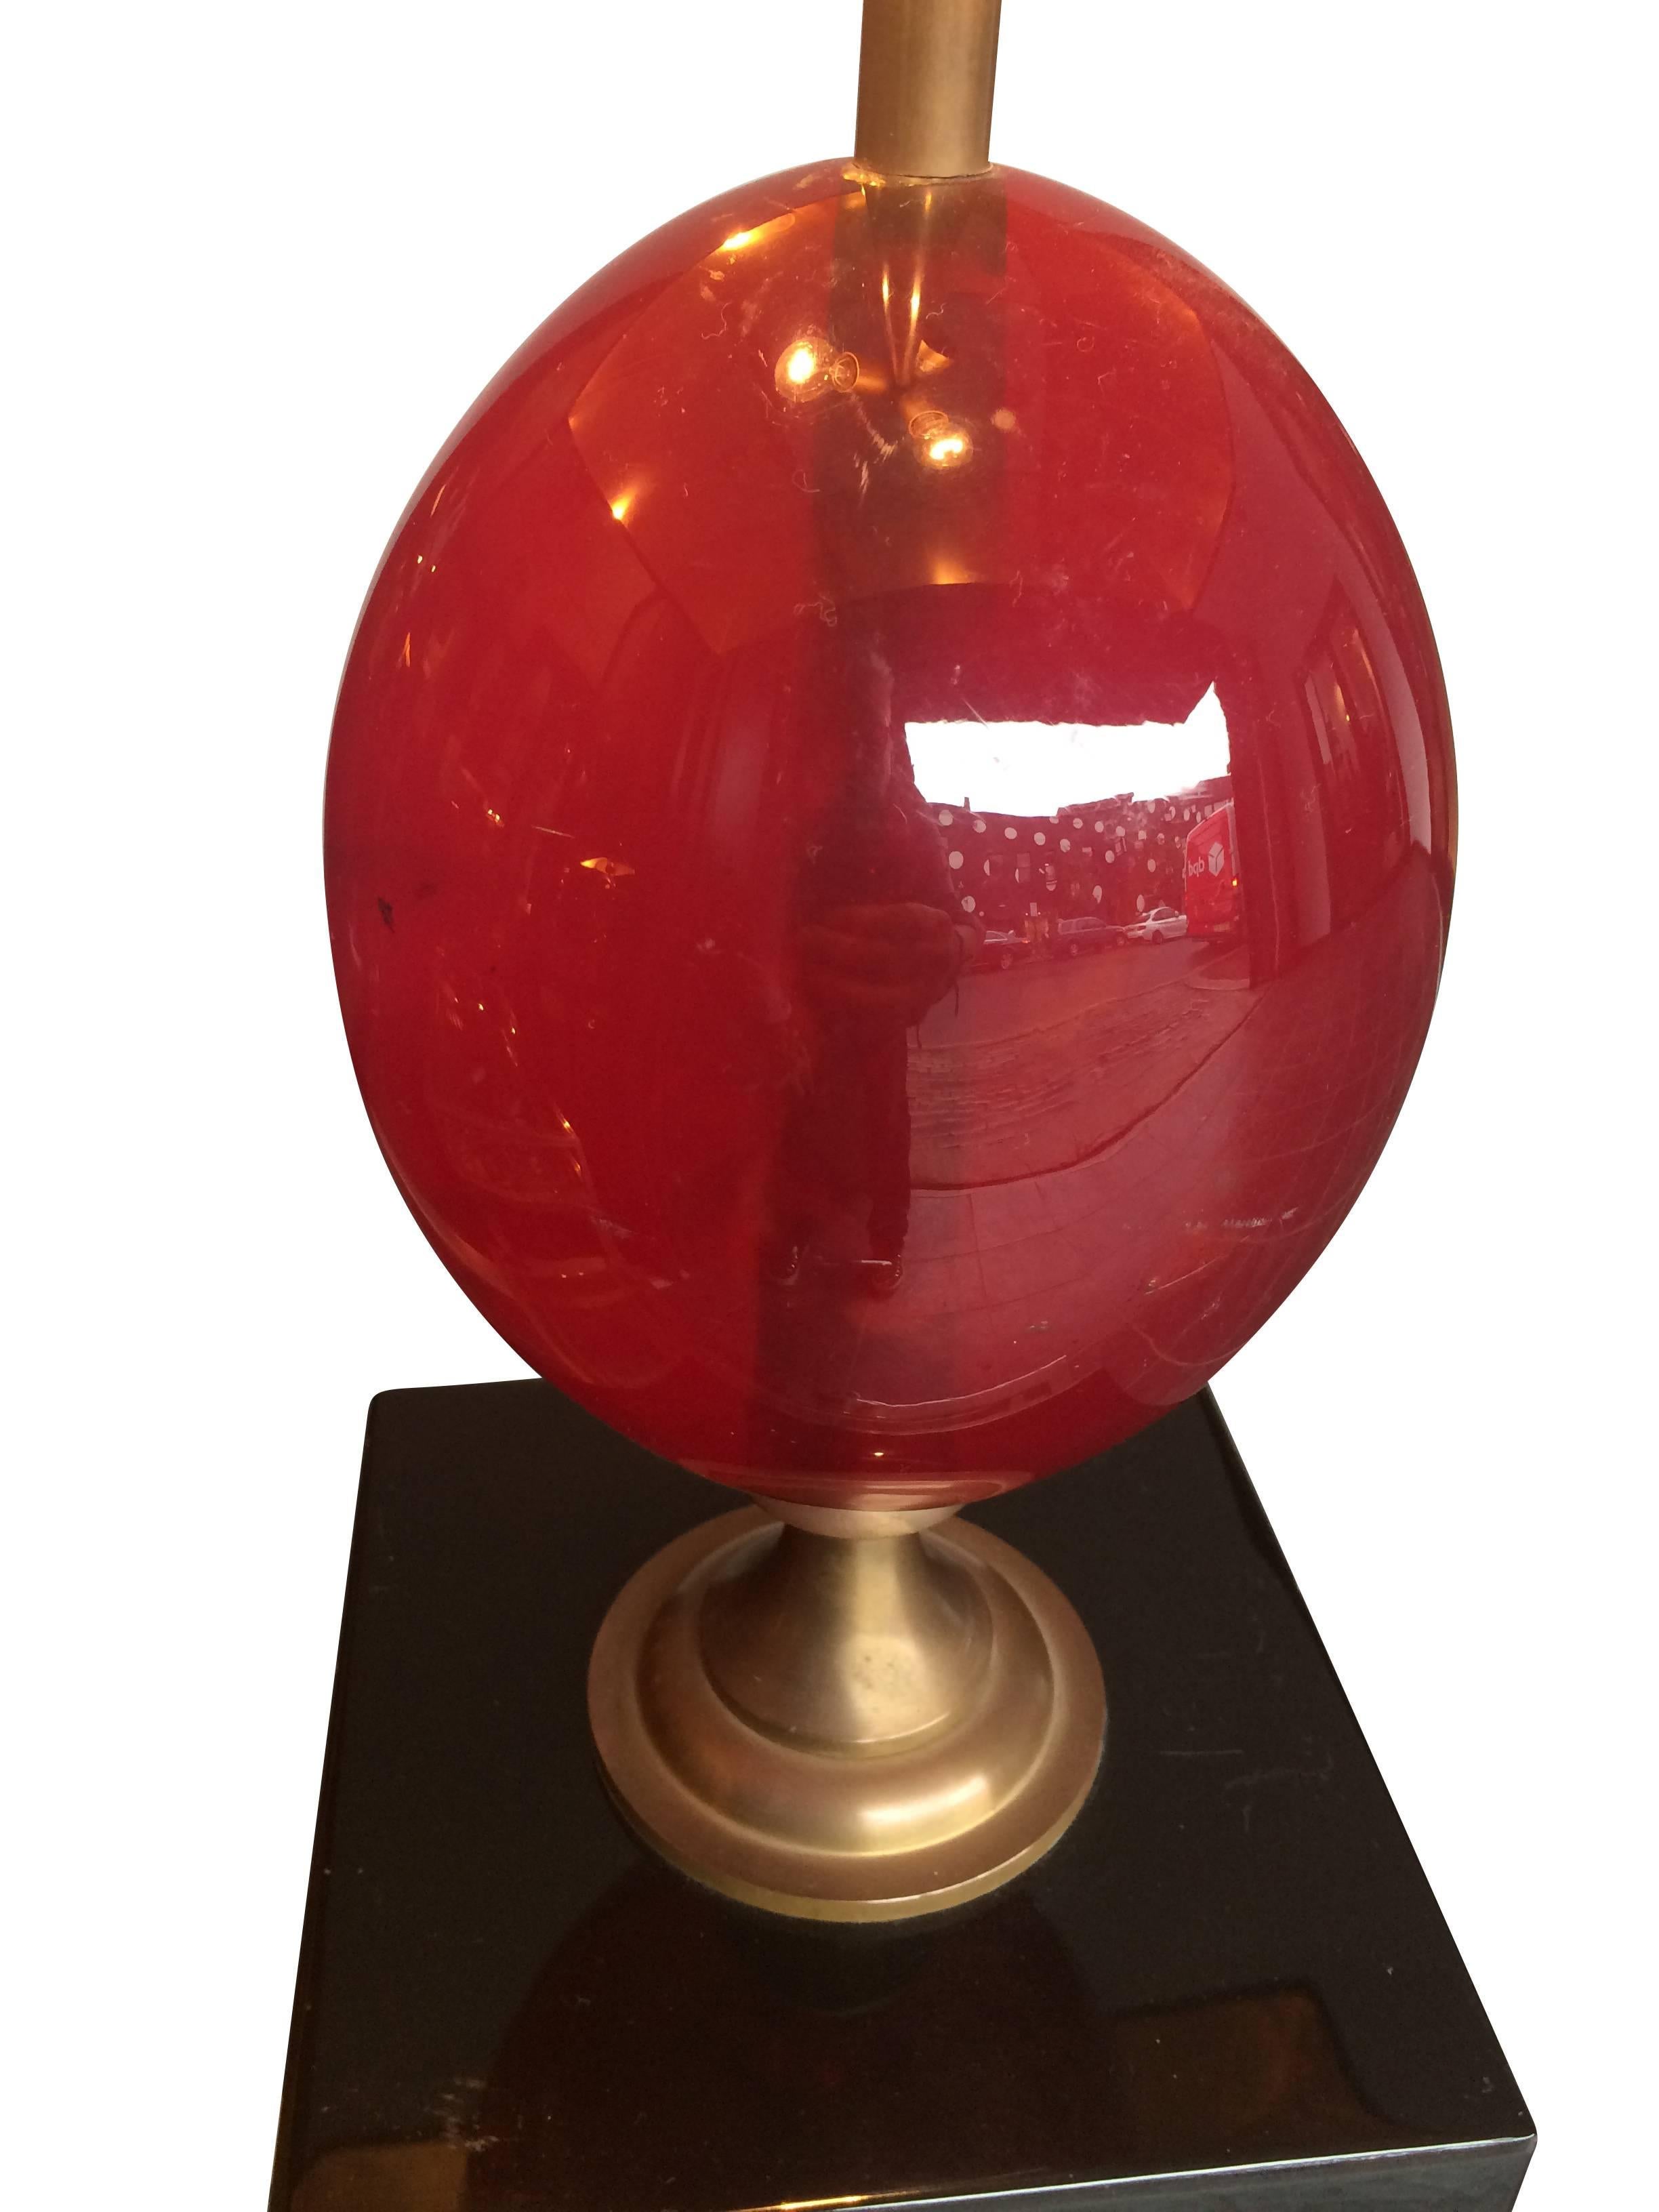 A stunning Maison Charles red resin egg lamp on a black lacquer base with gold and red gold flecked abstract detail. The large red resin egg mounted on brass stem with brass fittings. With original Charles, Paris brass plaque on the rear detailing